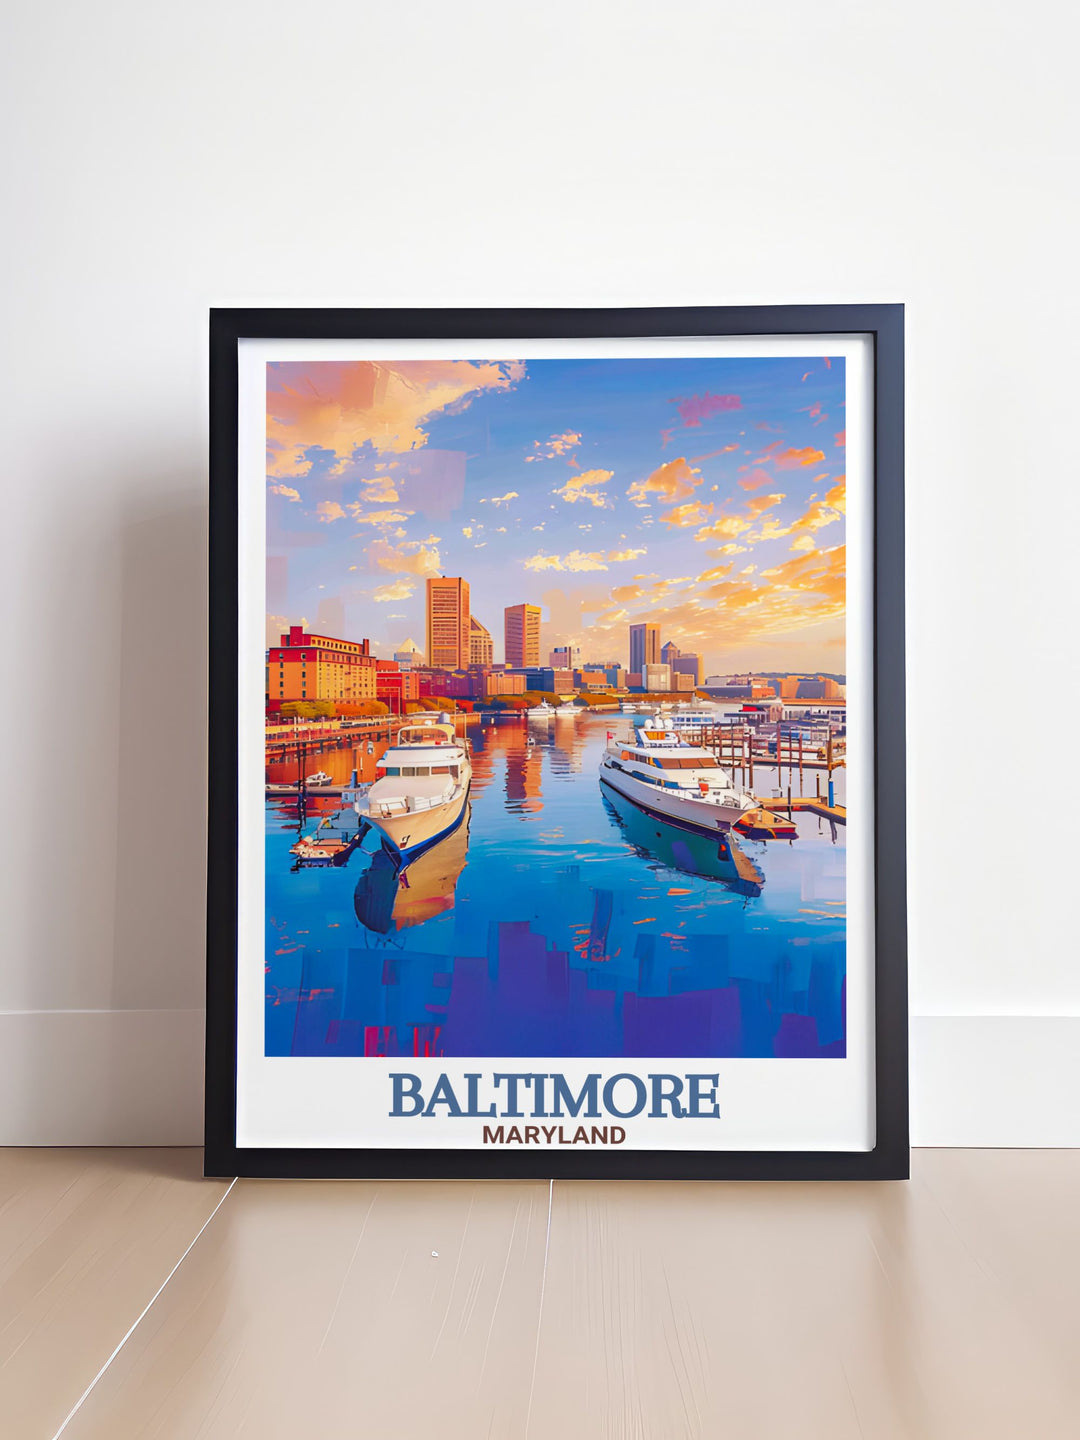 Sophisticated Inner Harbor home decor piece displaying a detailed street map of Baltimore this matted art print offers a stylish and meaningful addition to any wall perfect for those who love urban landscapes and city maps